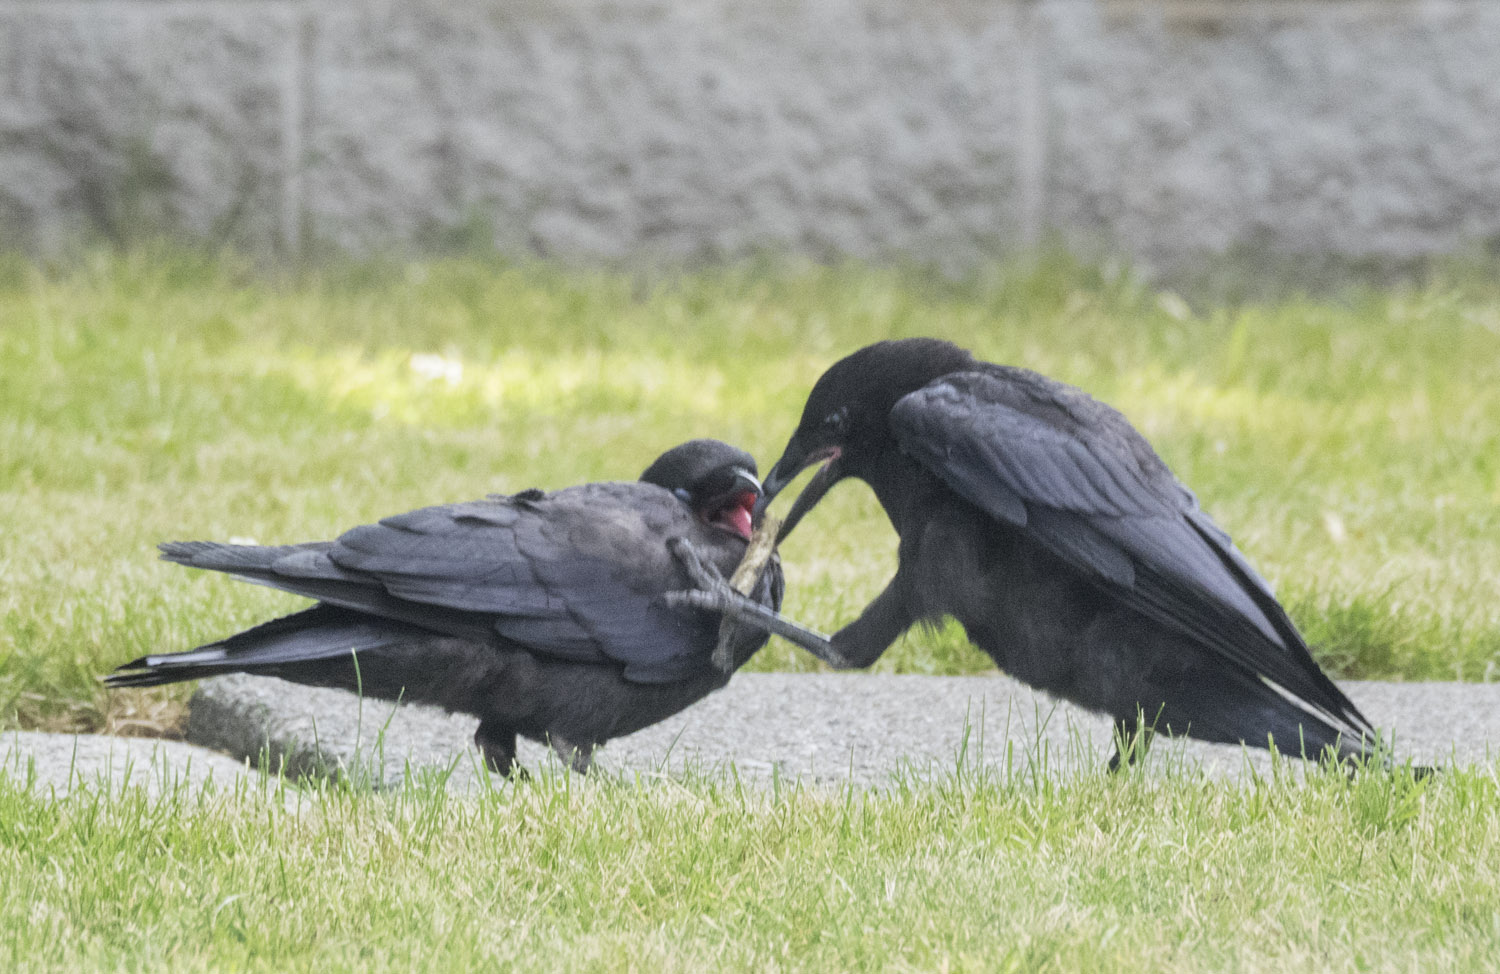 Baby Crow Feeding, photography by June Hunter, part of The Urban Nature Enthusiast blog post Real Baby Crows of East Van, image copyright June Hunter 2017